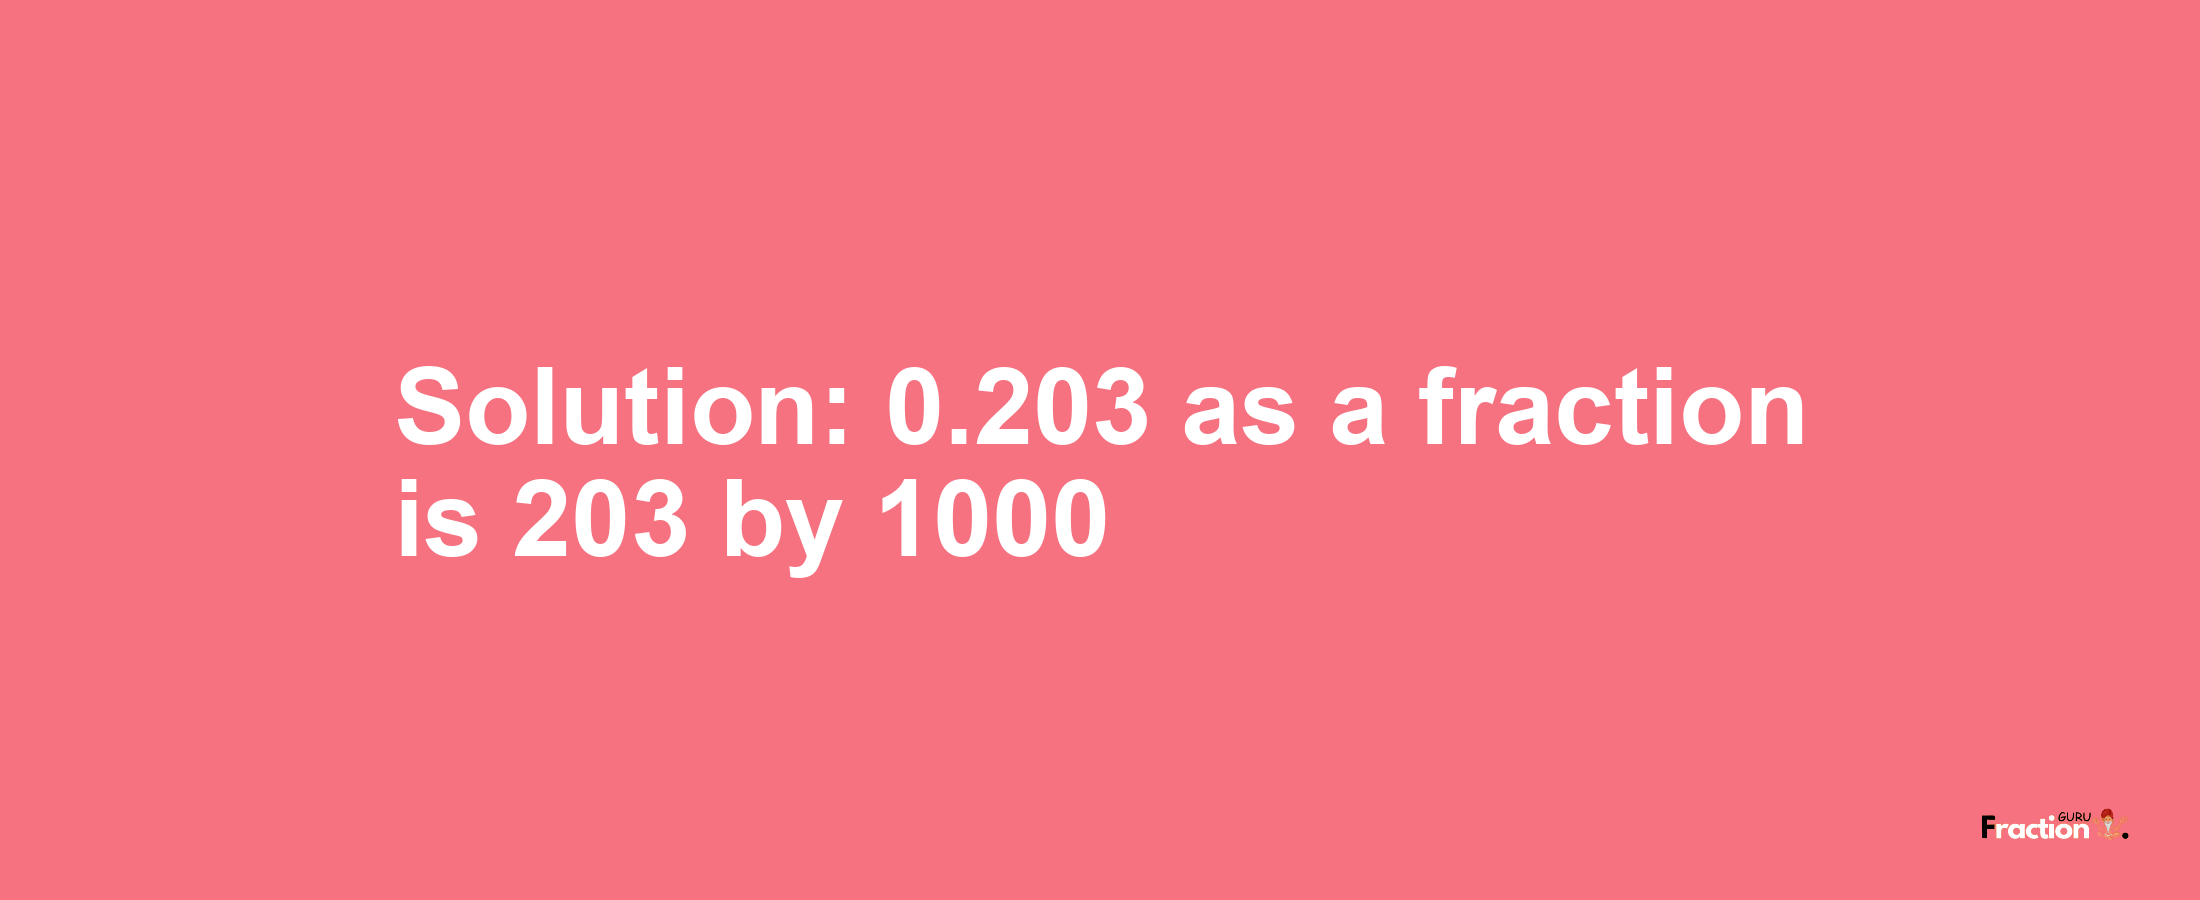 Solution:0.203 as a fraction is 203/1000